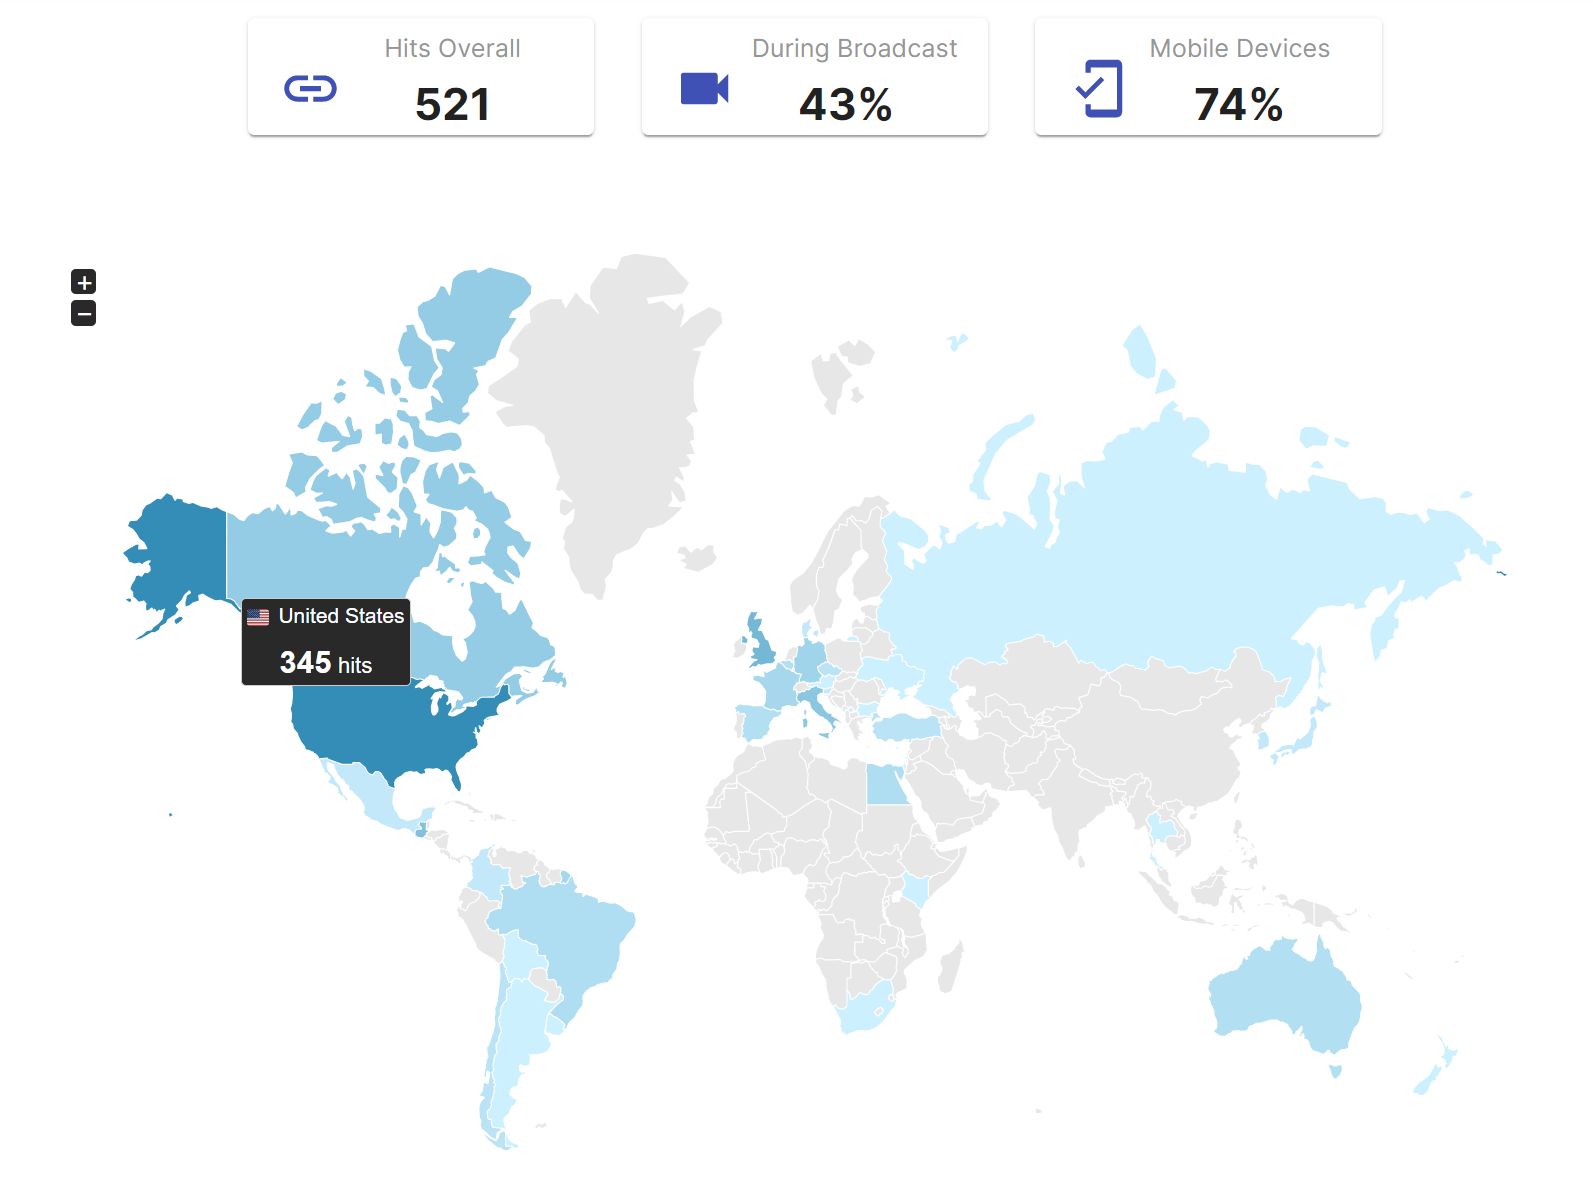 See where your viewers are coming from on a world map